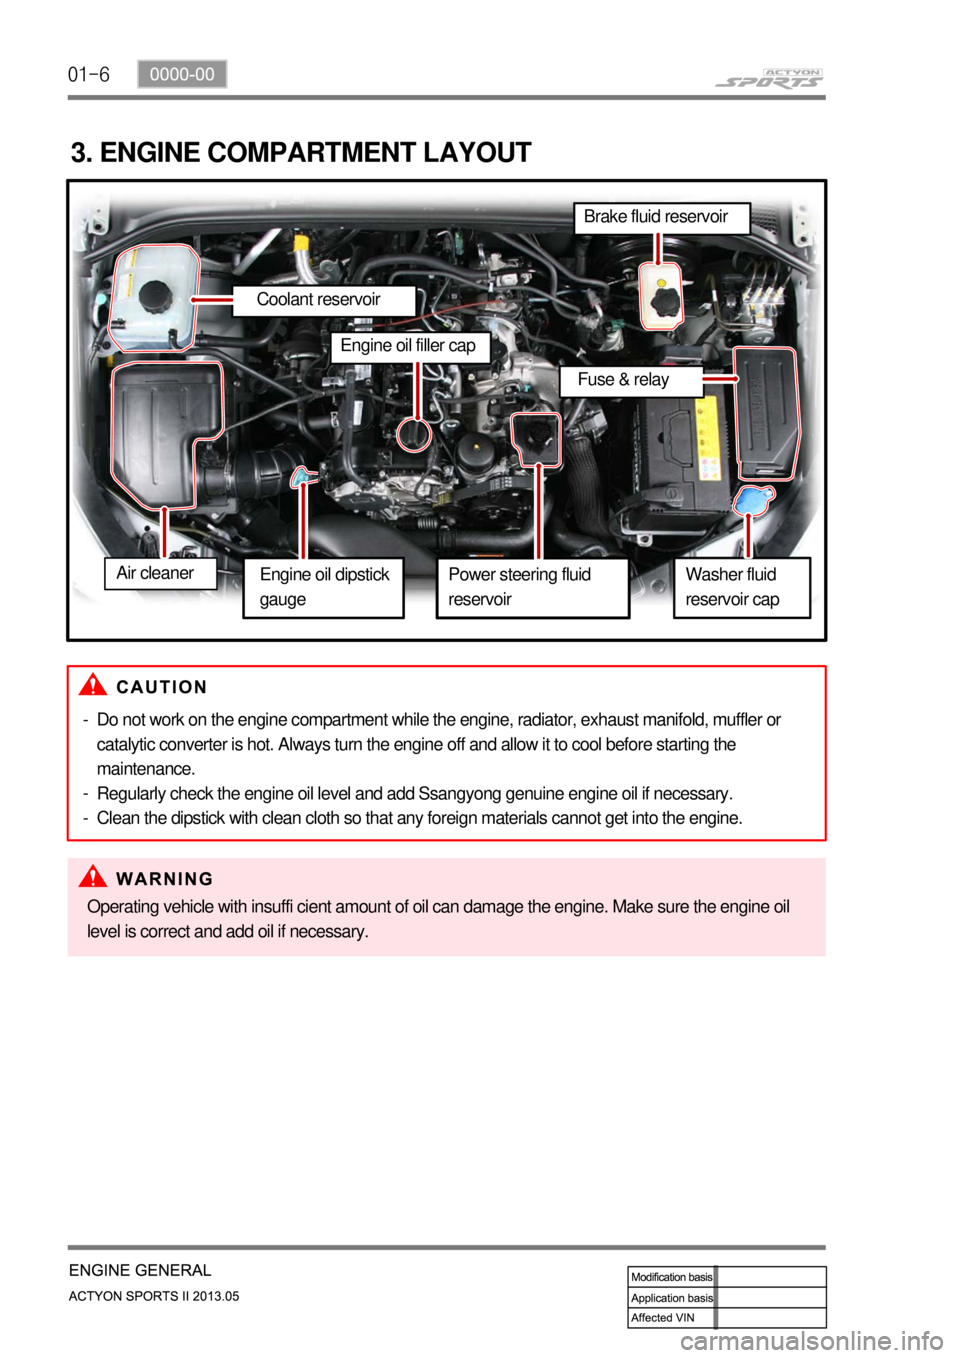 SSANGYONG NEW ACTYON SPORTS 2013  Service Manual 01-6
3. ENGINE COMPARTMENT LAYOUT
Do not work on the engine compartment while the engine, radiator, exhaust manifold, muffler or 
catalytic converter is hot. Always turn the engine off and allow it to